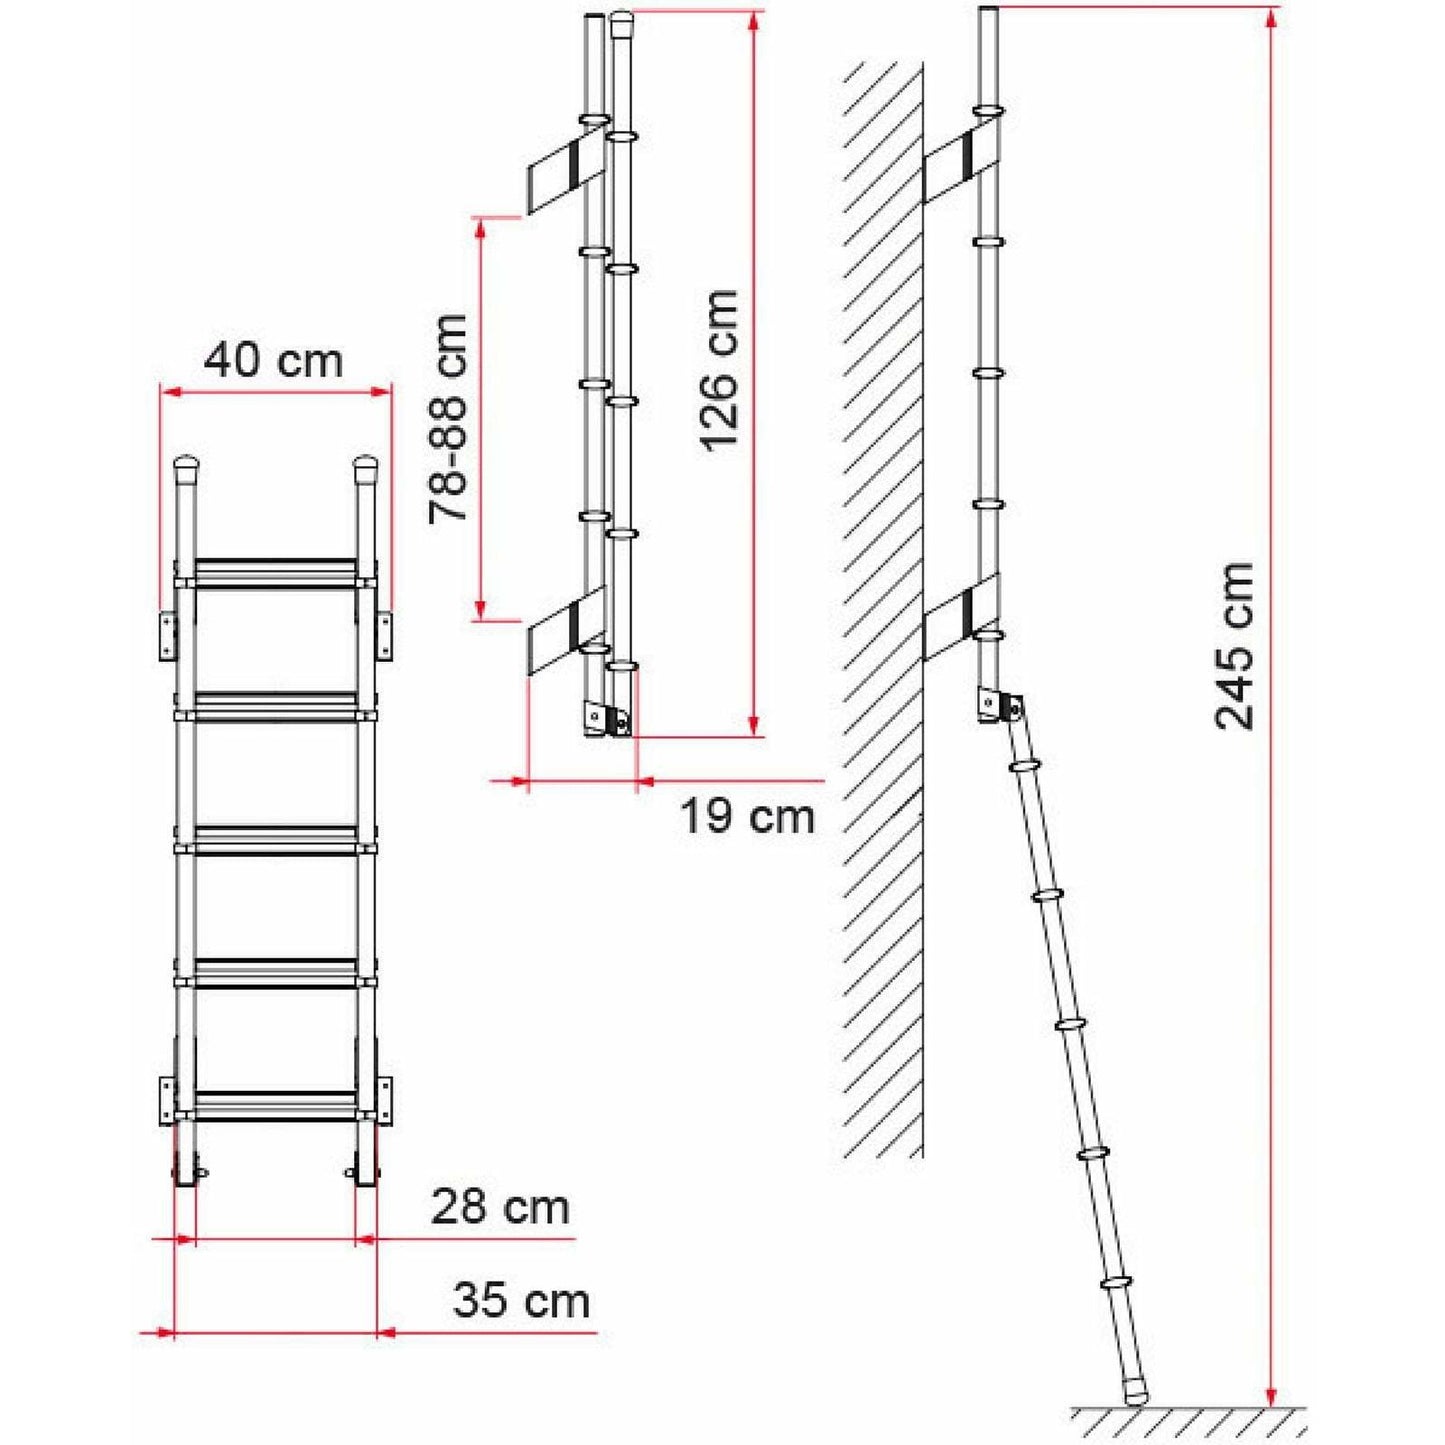 Fiamma Deluxe 5D Folding Motorhome Ladder made by Fiamma. A Ladders sold by Quality Caravan Awnings